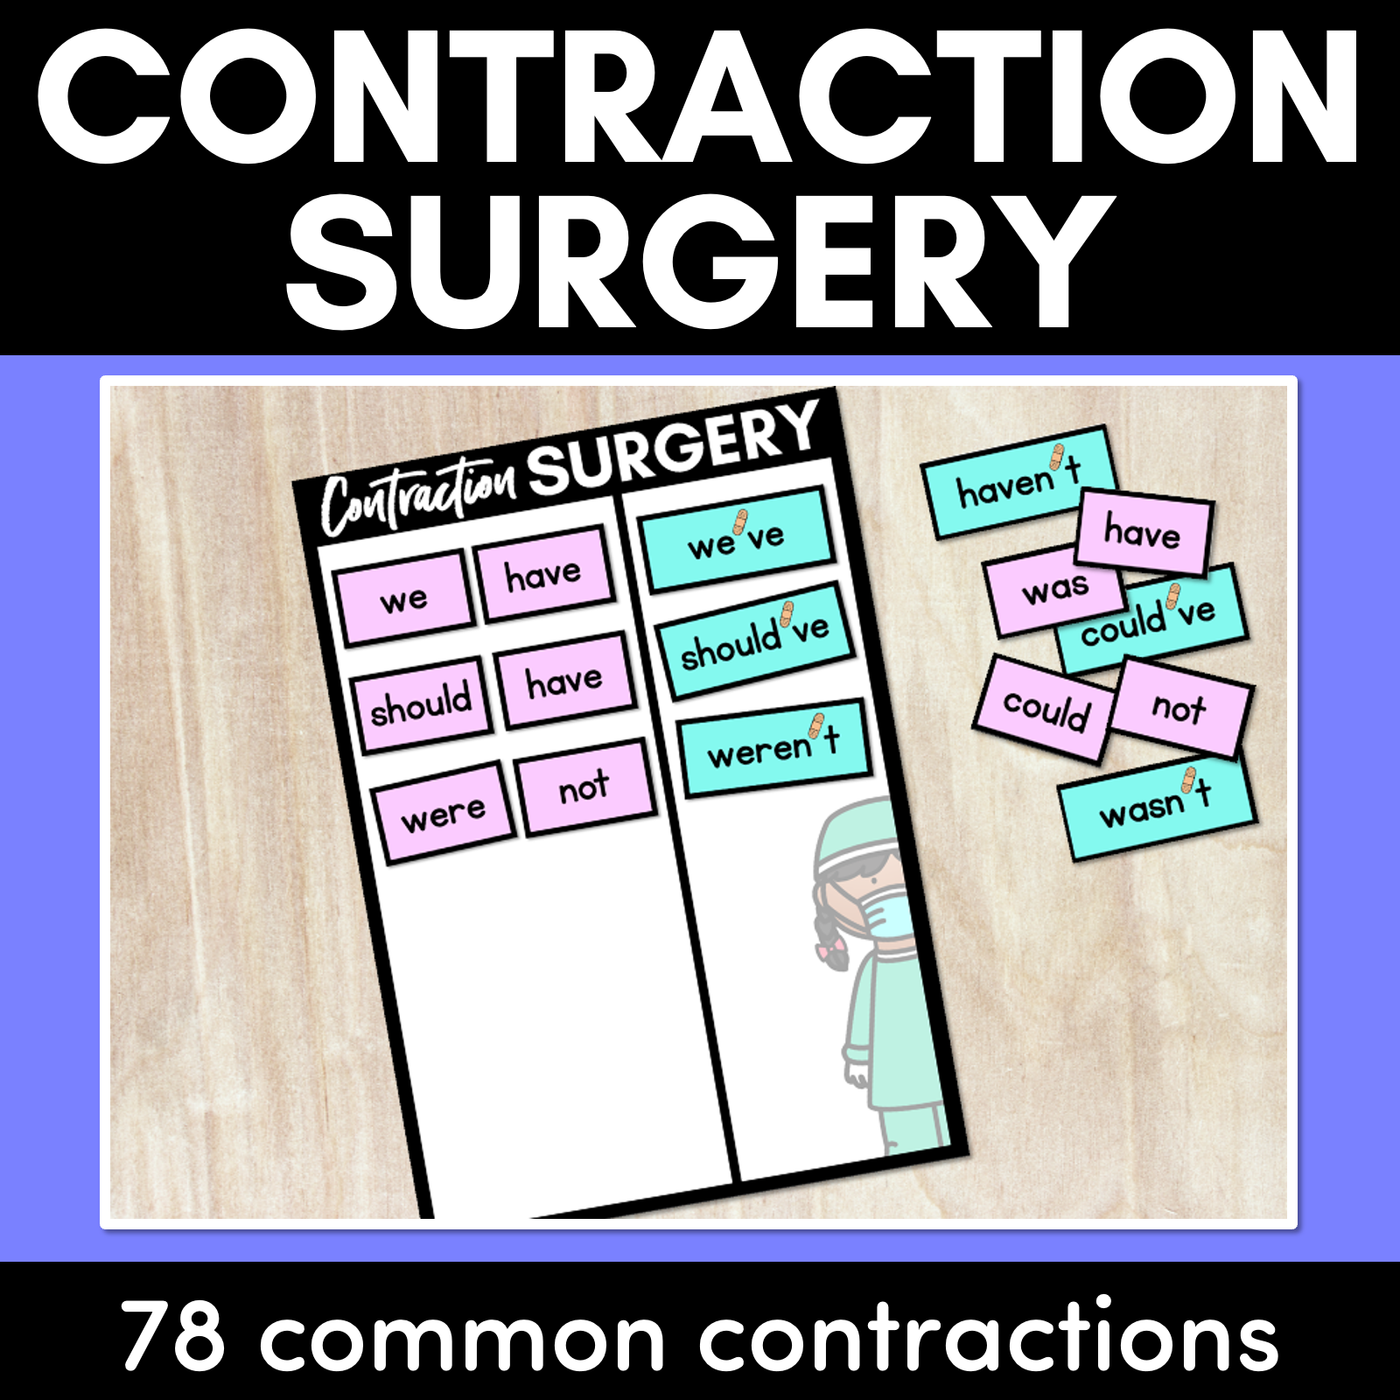 CONTRACTIONS SURGERY - bandaid apostrophes for contractions & common possessives